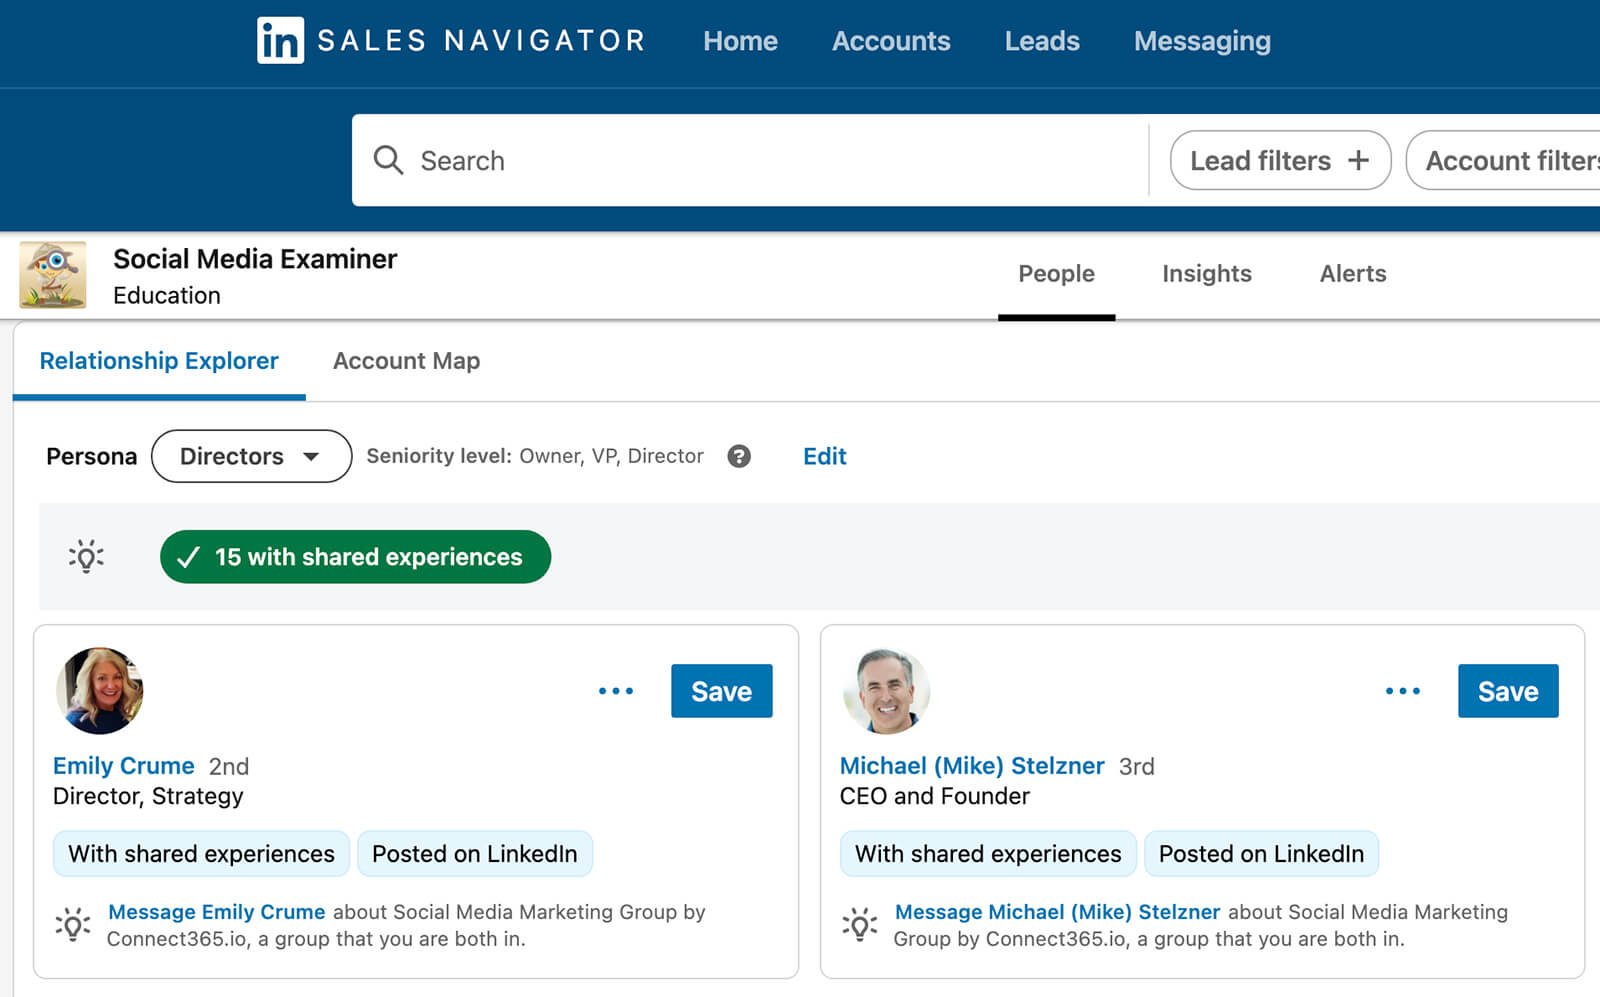 build-and-activate-a-professional-network-on-linkedin-streamline-connections-with-sales-navigator-6